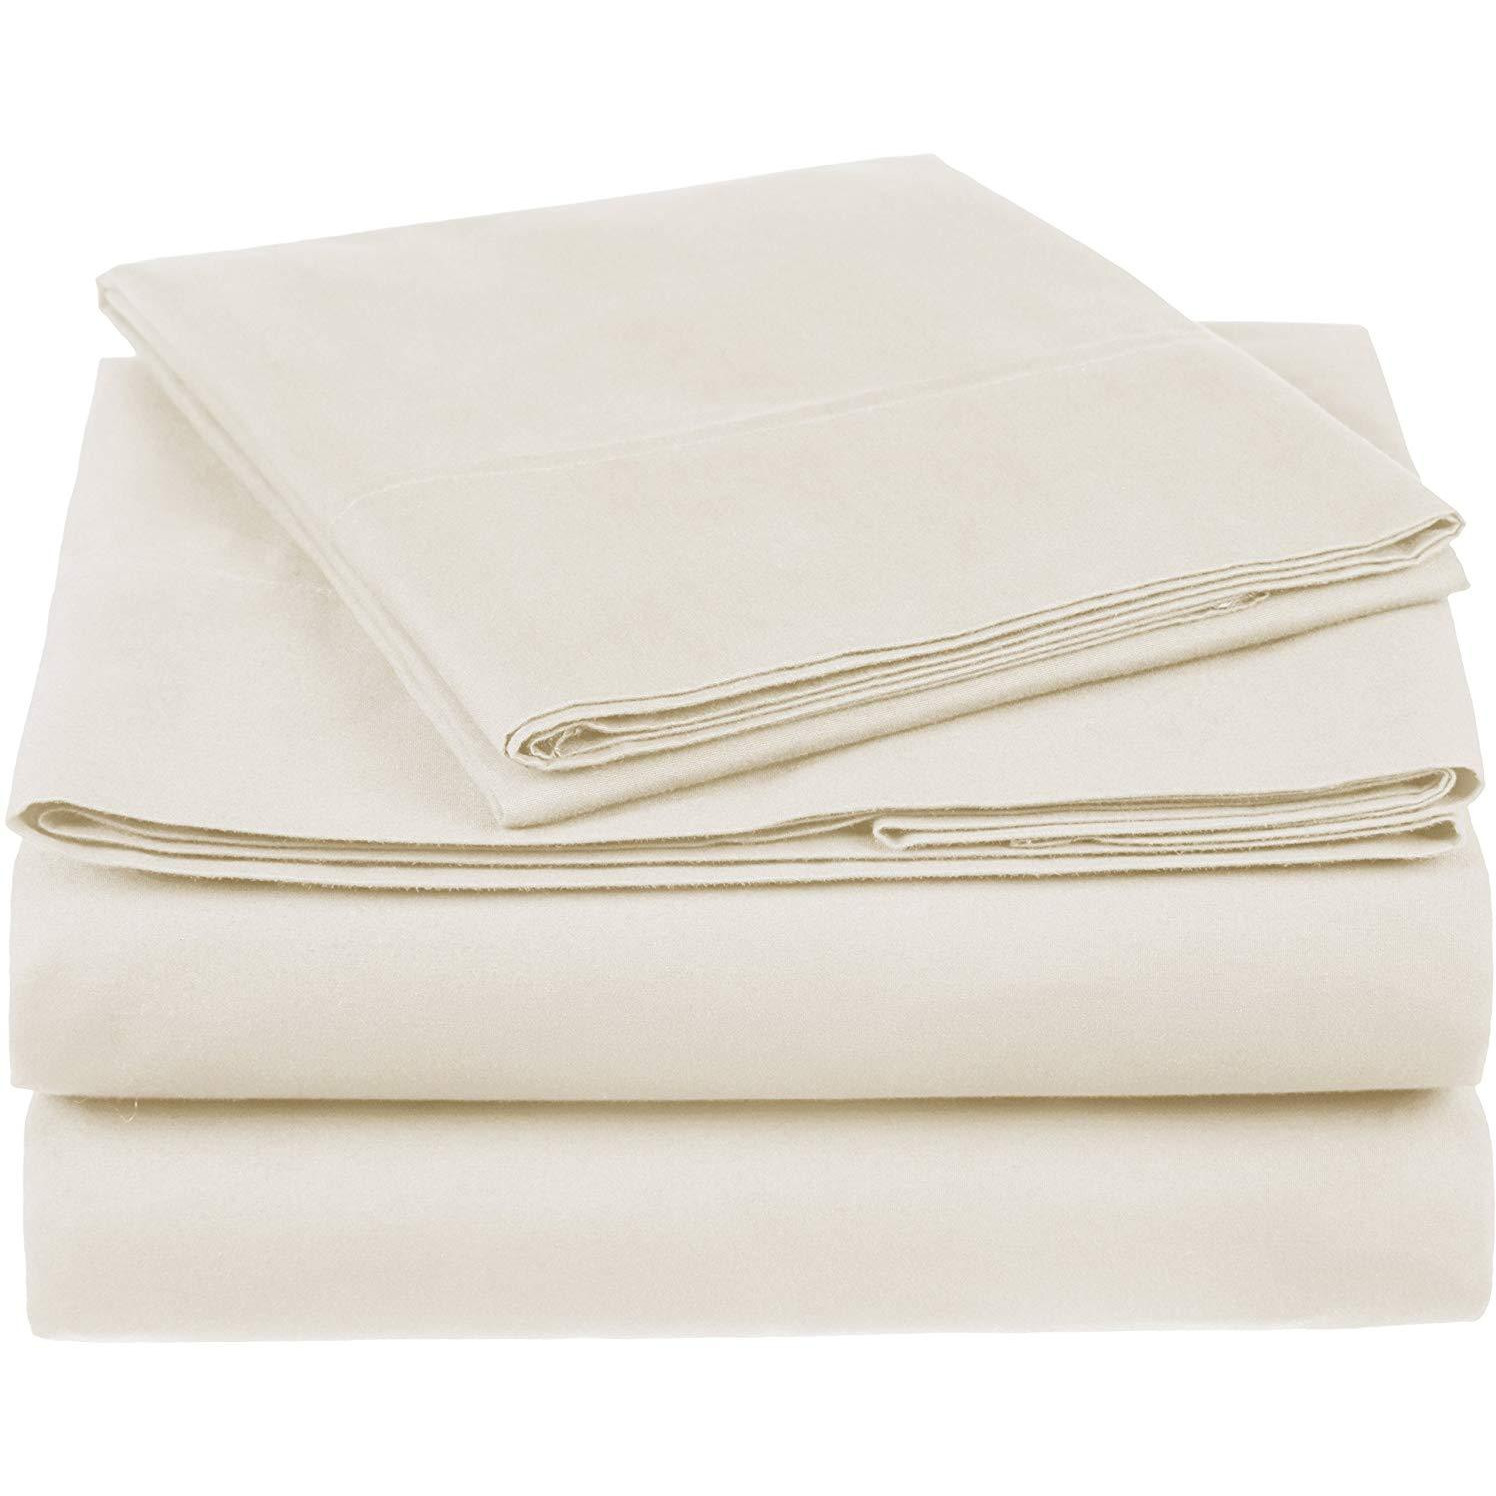 100% Cotton Sheet Set - 400 Thread Count (Piece:4 PIECE, Size:KING, Color:TAUPE)